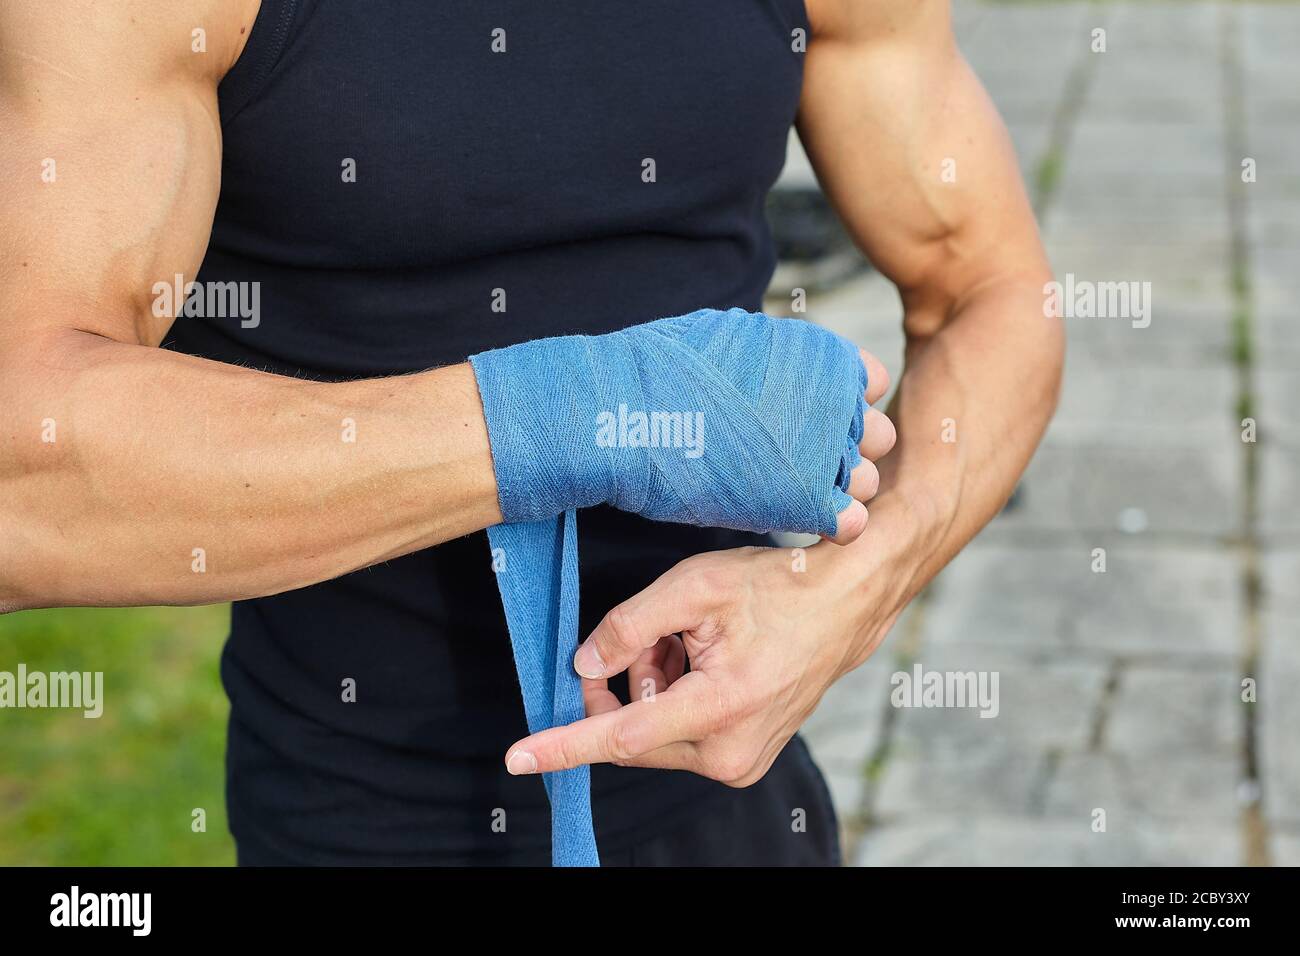 a man wraps his hands in Boxing bandages Stock Photo